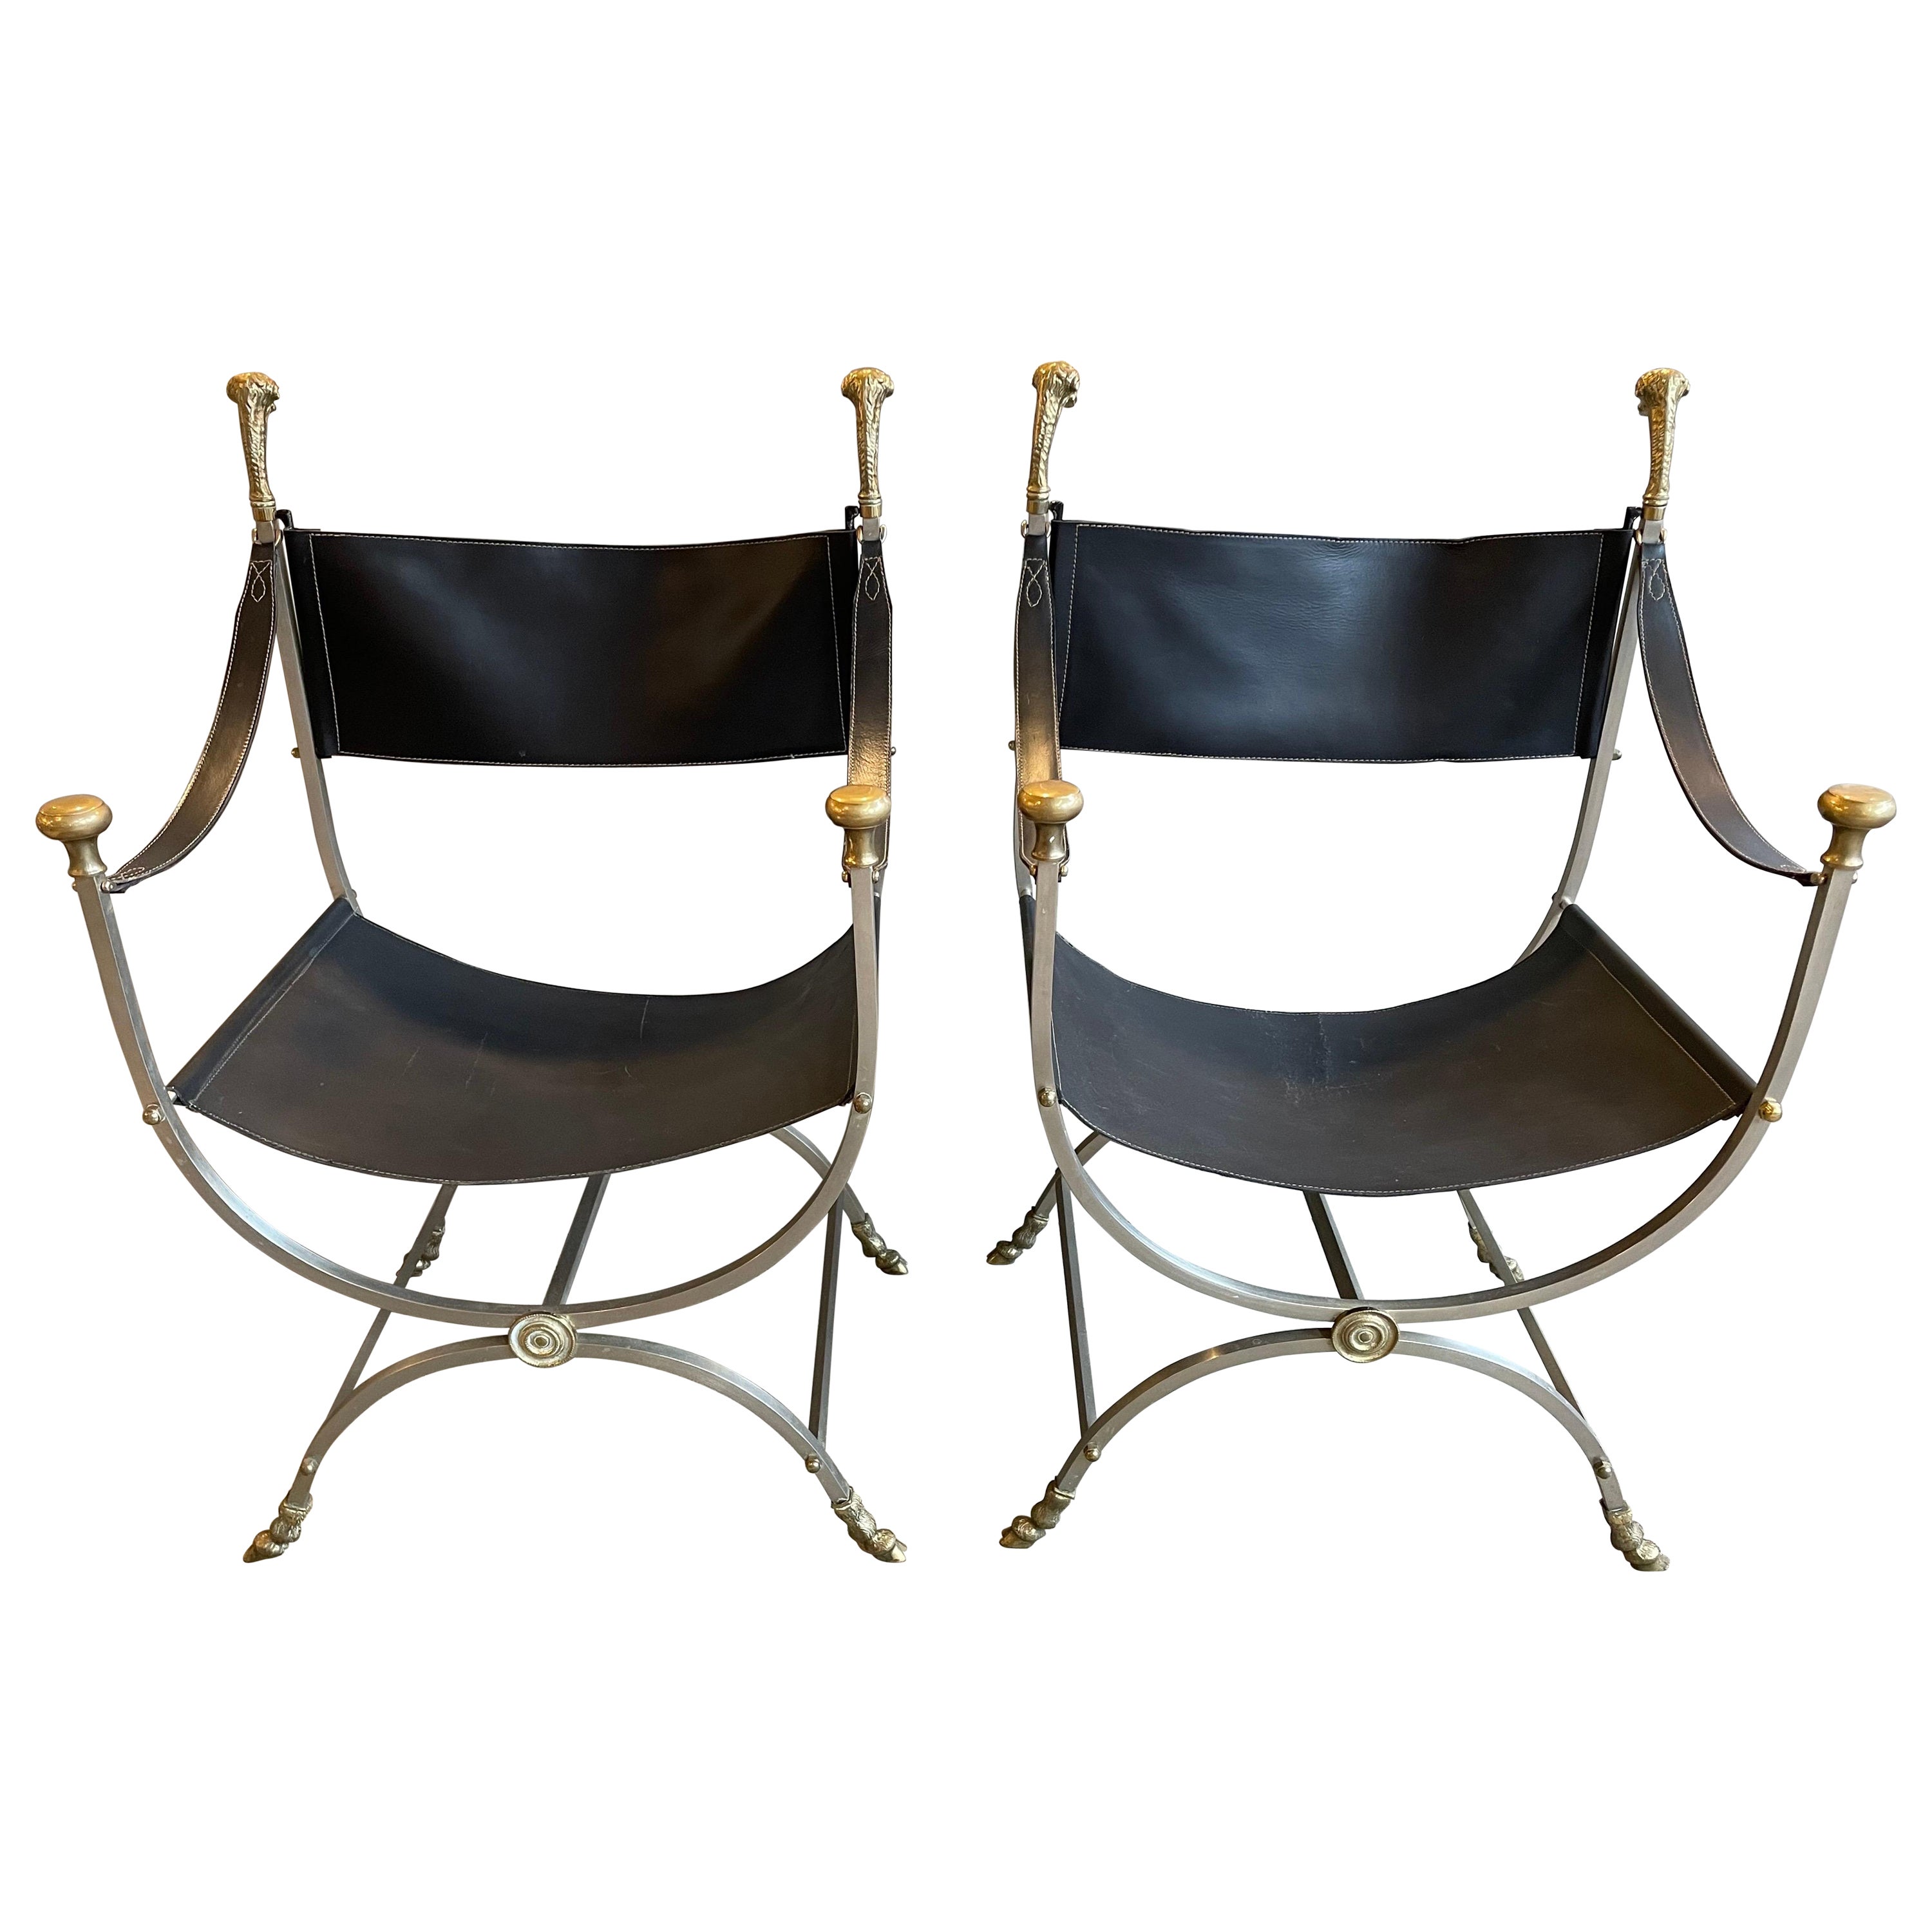 Curule Chairs in Style of Maison Jansen